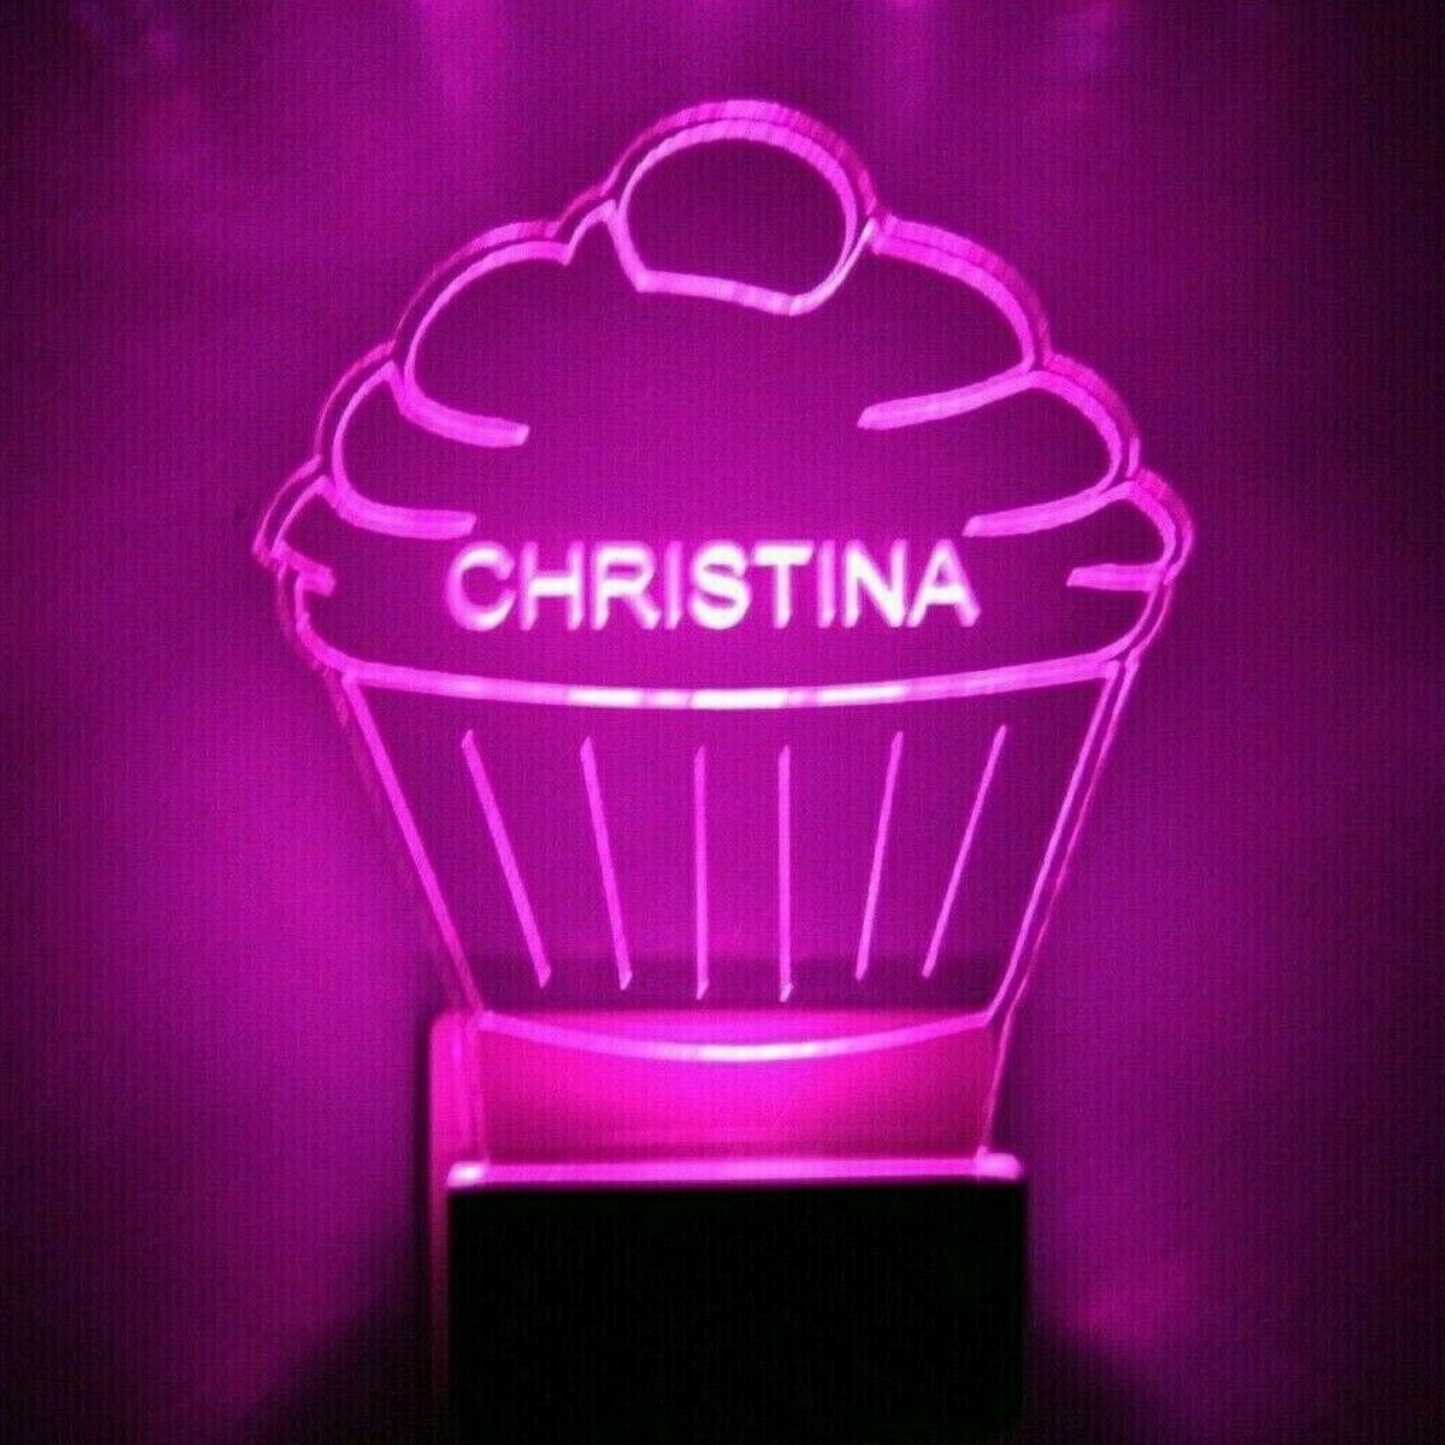 Cupcake Night Light Multi Color Personalized LED Wall Plug-in, Cool-Touch Smart Dusk to Dawn Sensor, Bedroom, Hallway, Bathroom, Super Cool